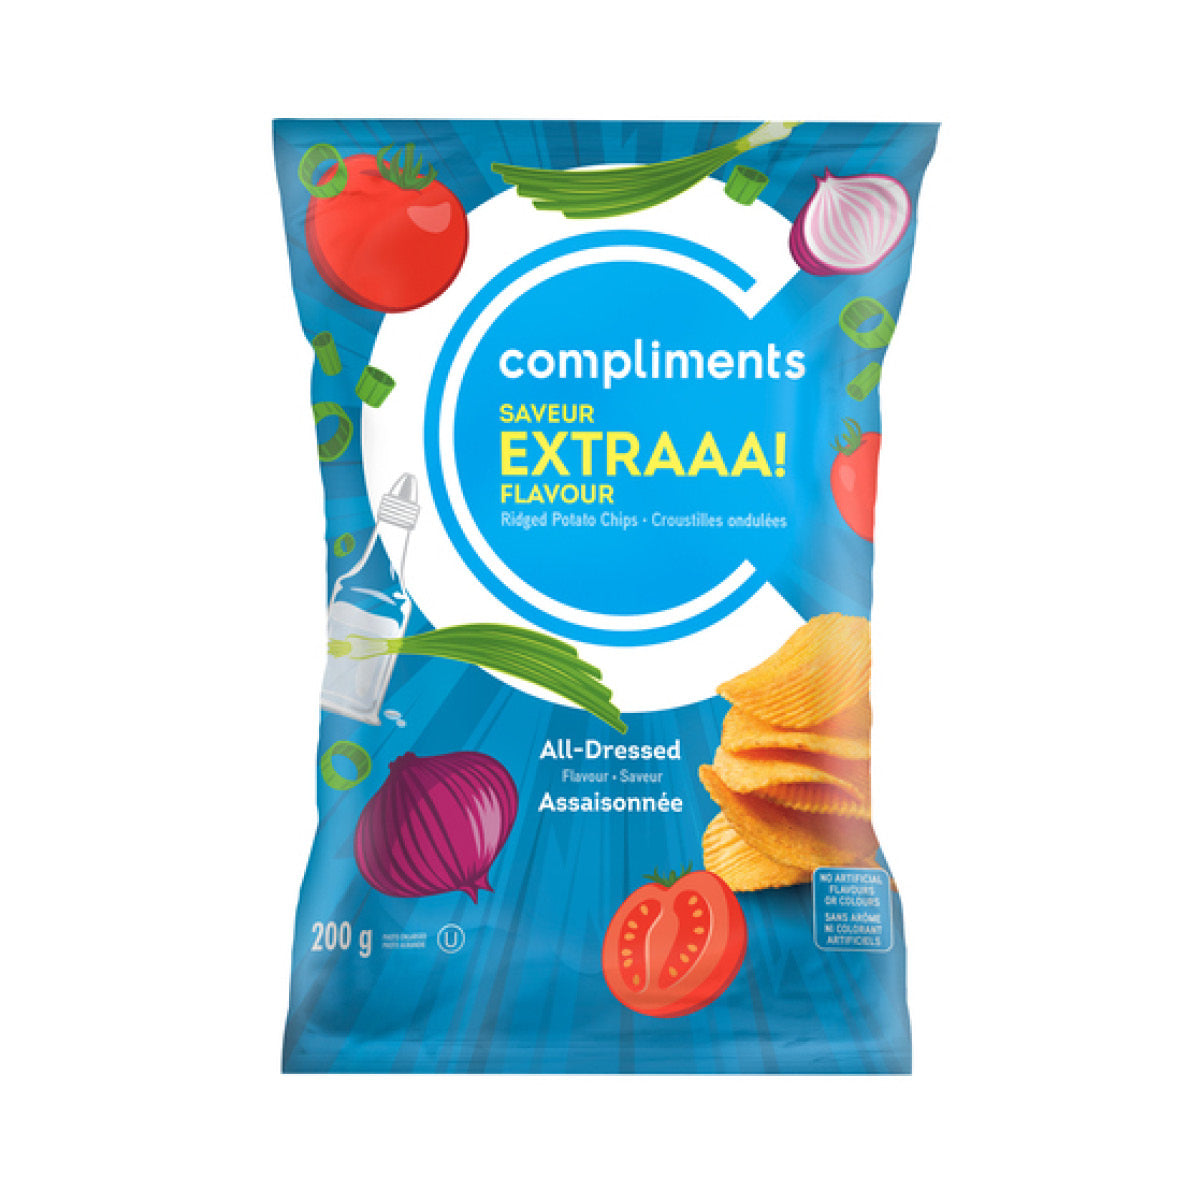 Compliments Extraaa! All-Dressed Ridged Potato Chips, 200g